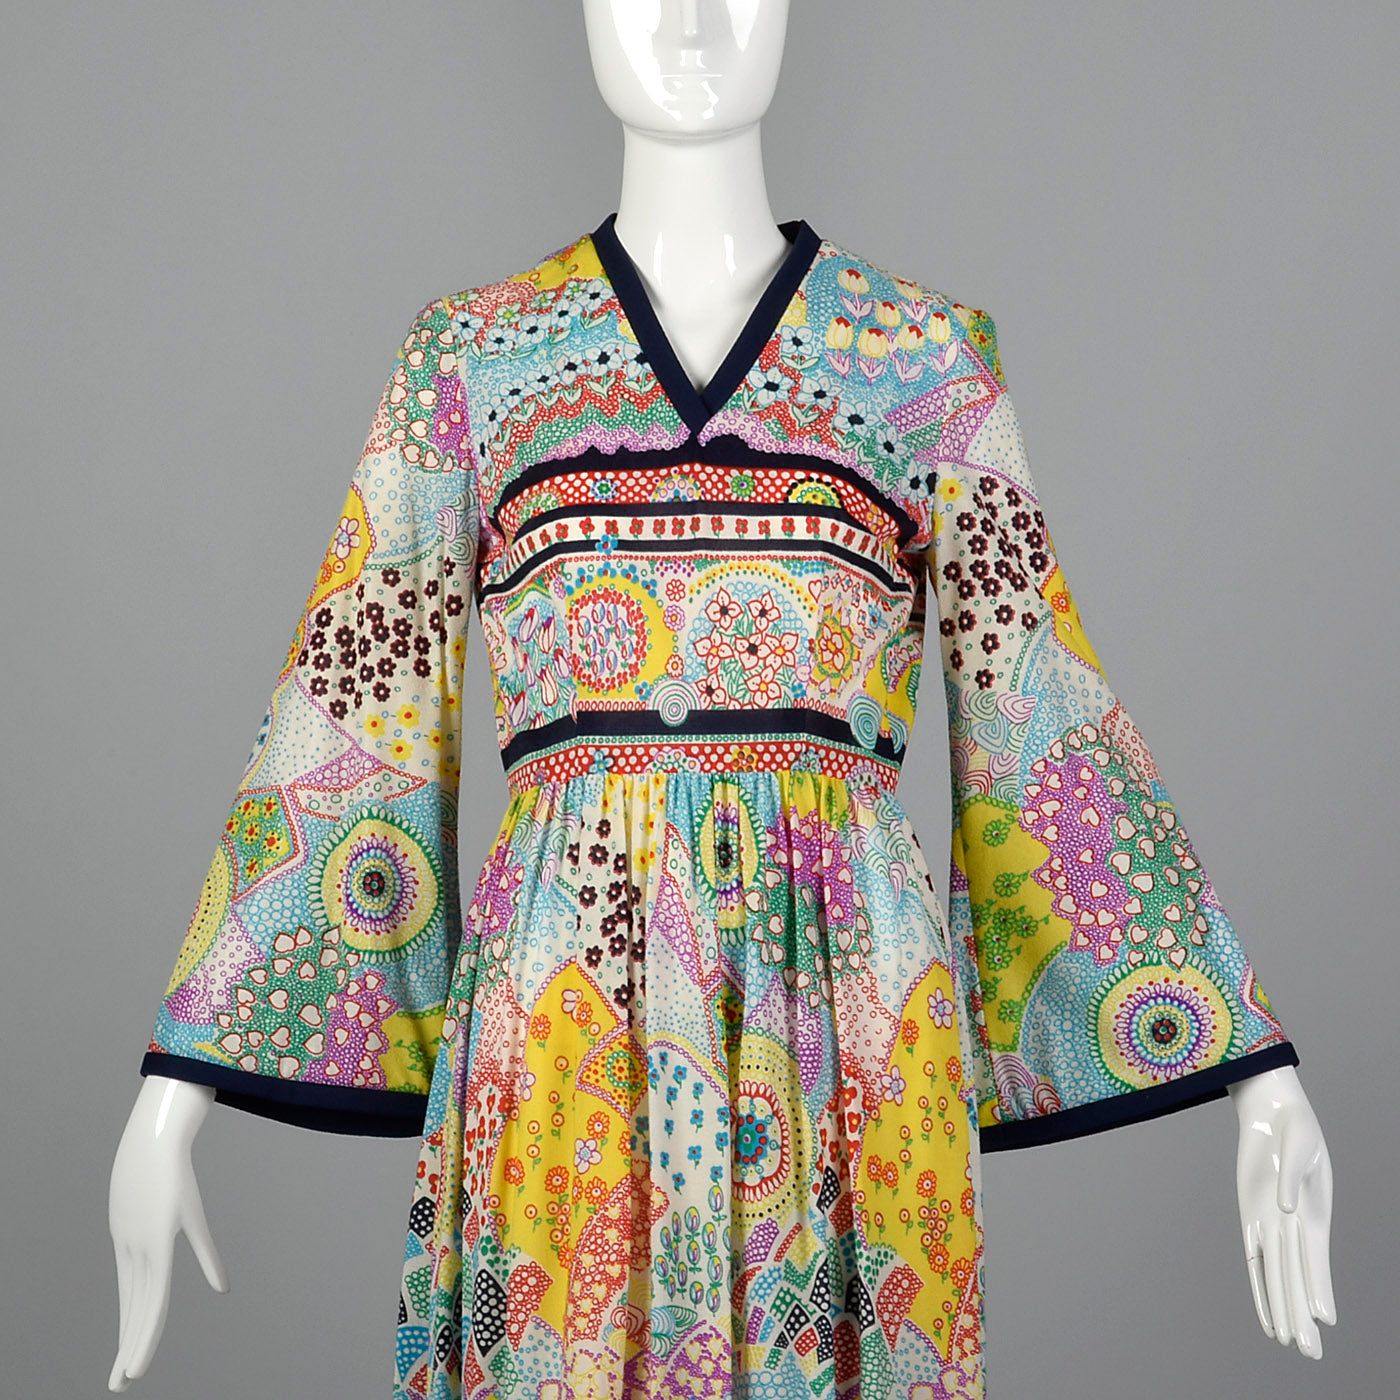 1970s Psychedelic Print Maxi Dress with Bell Sleeves